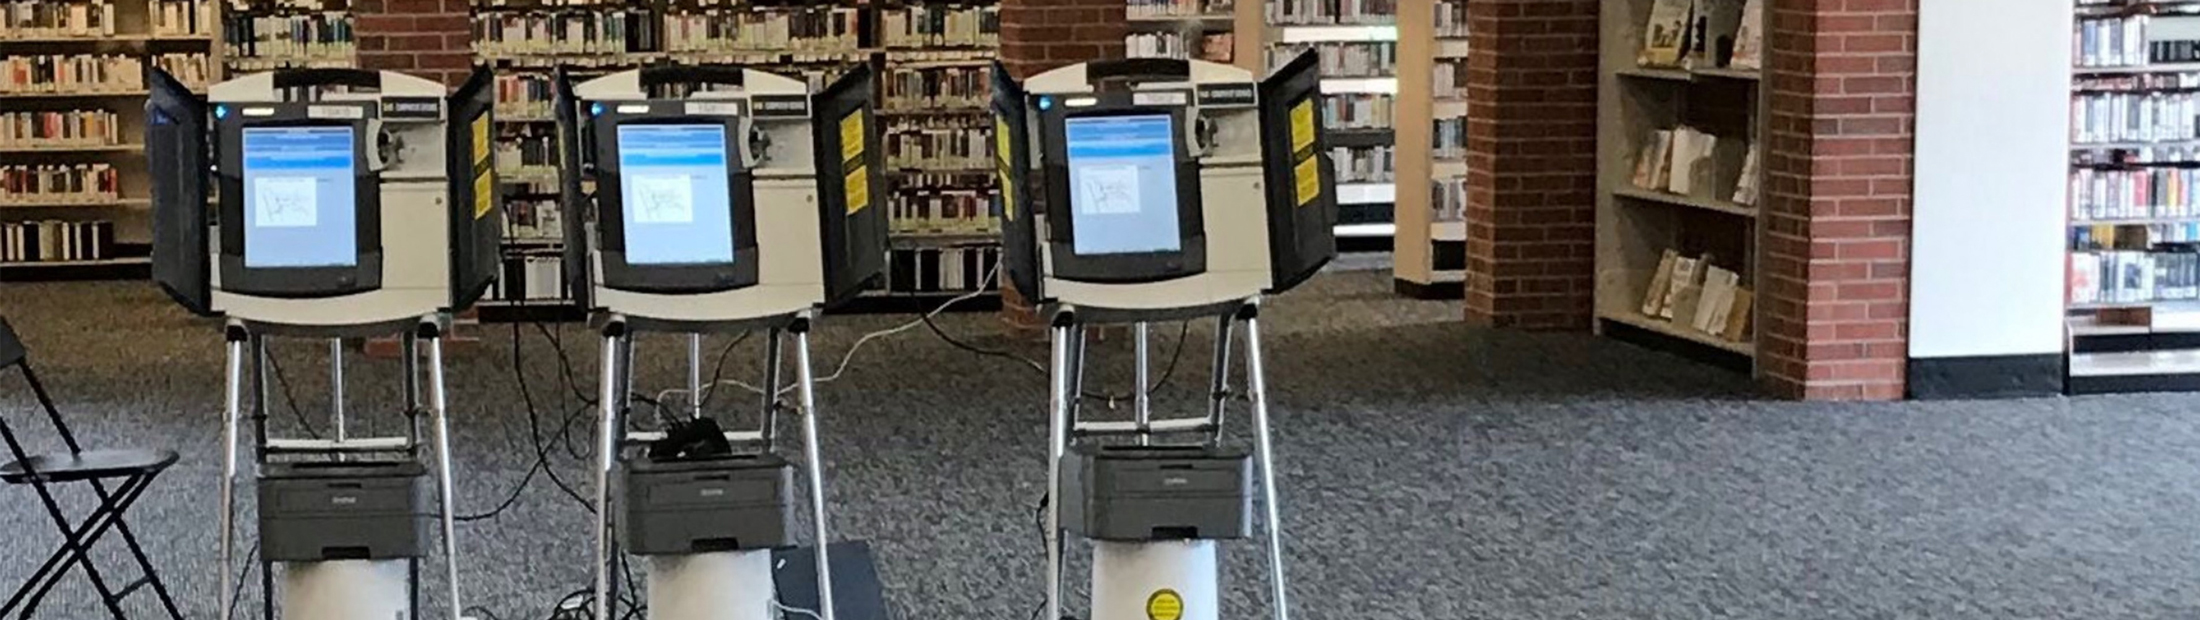 The voting machines set up in the Ann Arbor District Library